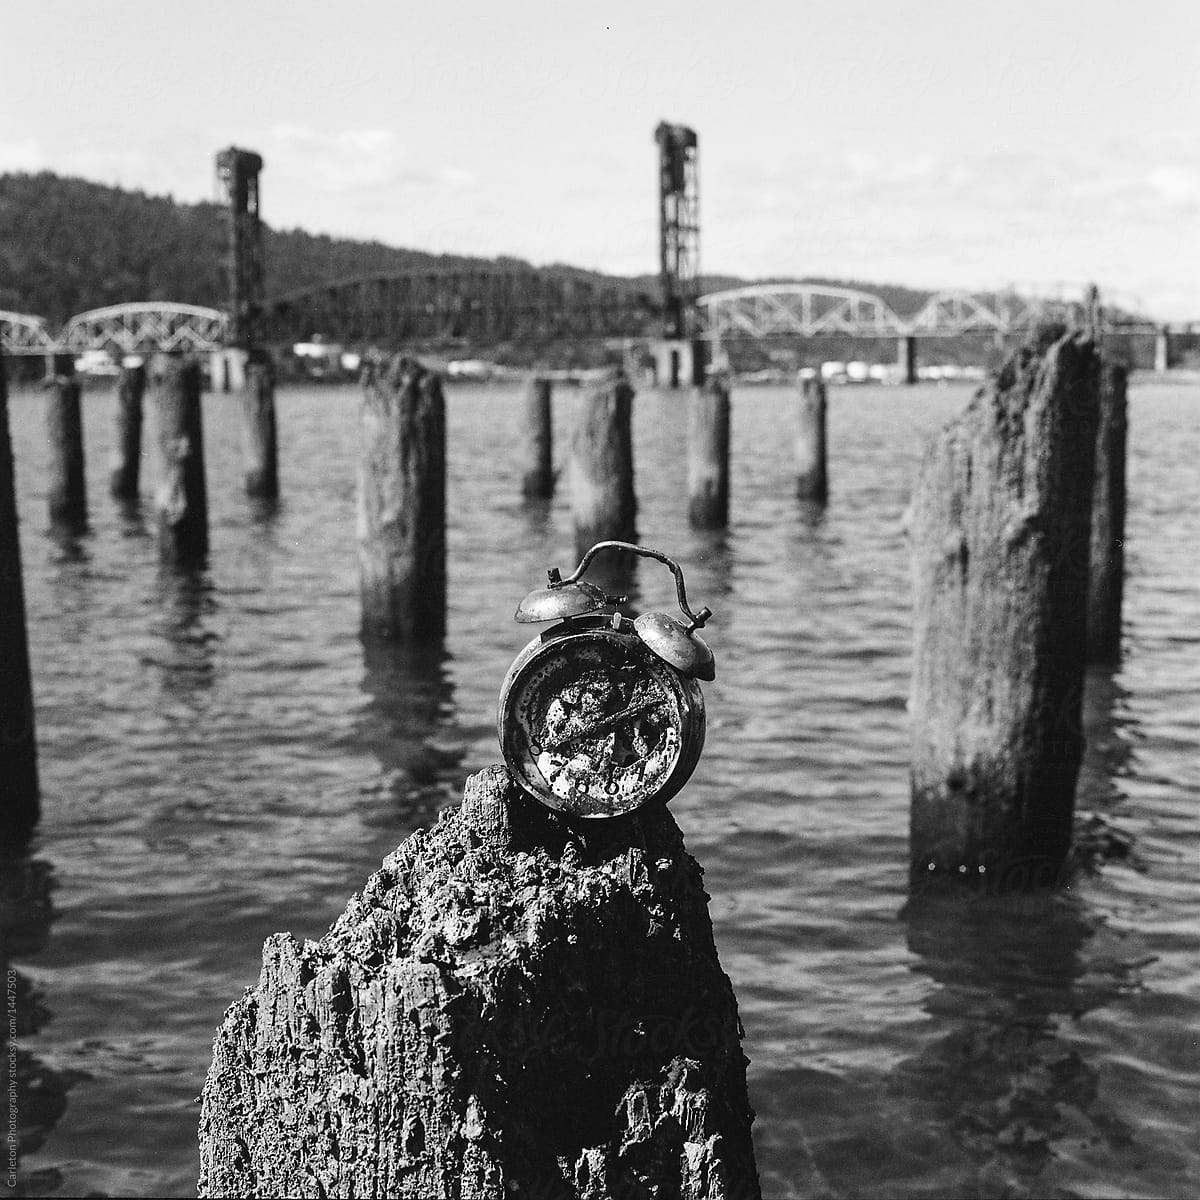 Rusted alarm clock on pilings